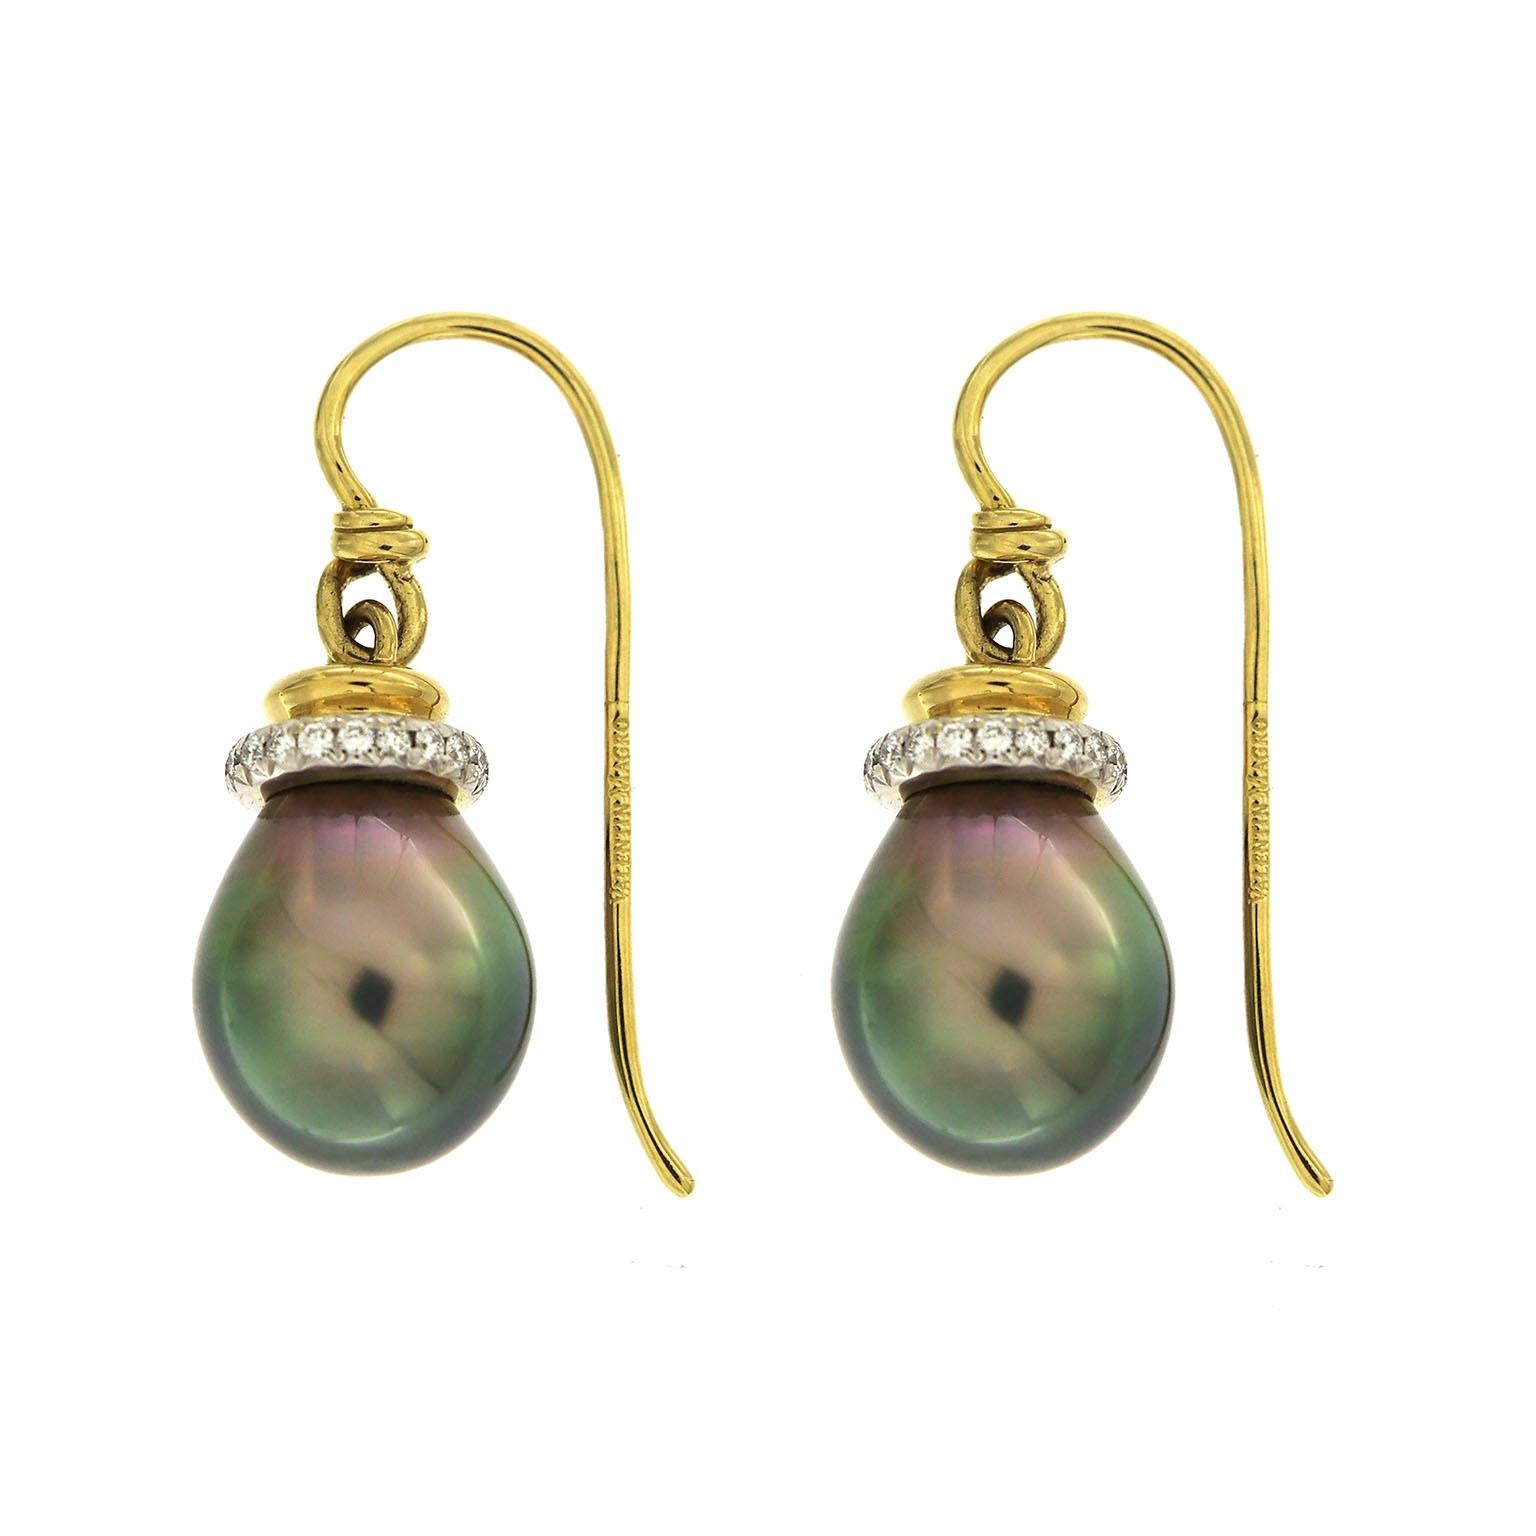 Valentin Magro Tahitian Pearl Earrings with Diamond Cap and French Wire transform white light into rainbows. The base is 18k yellow gold, which forms both the French wire hooks and the cap. Said cap is pave set with round brilliant cut diamonds,